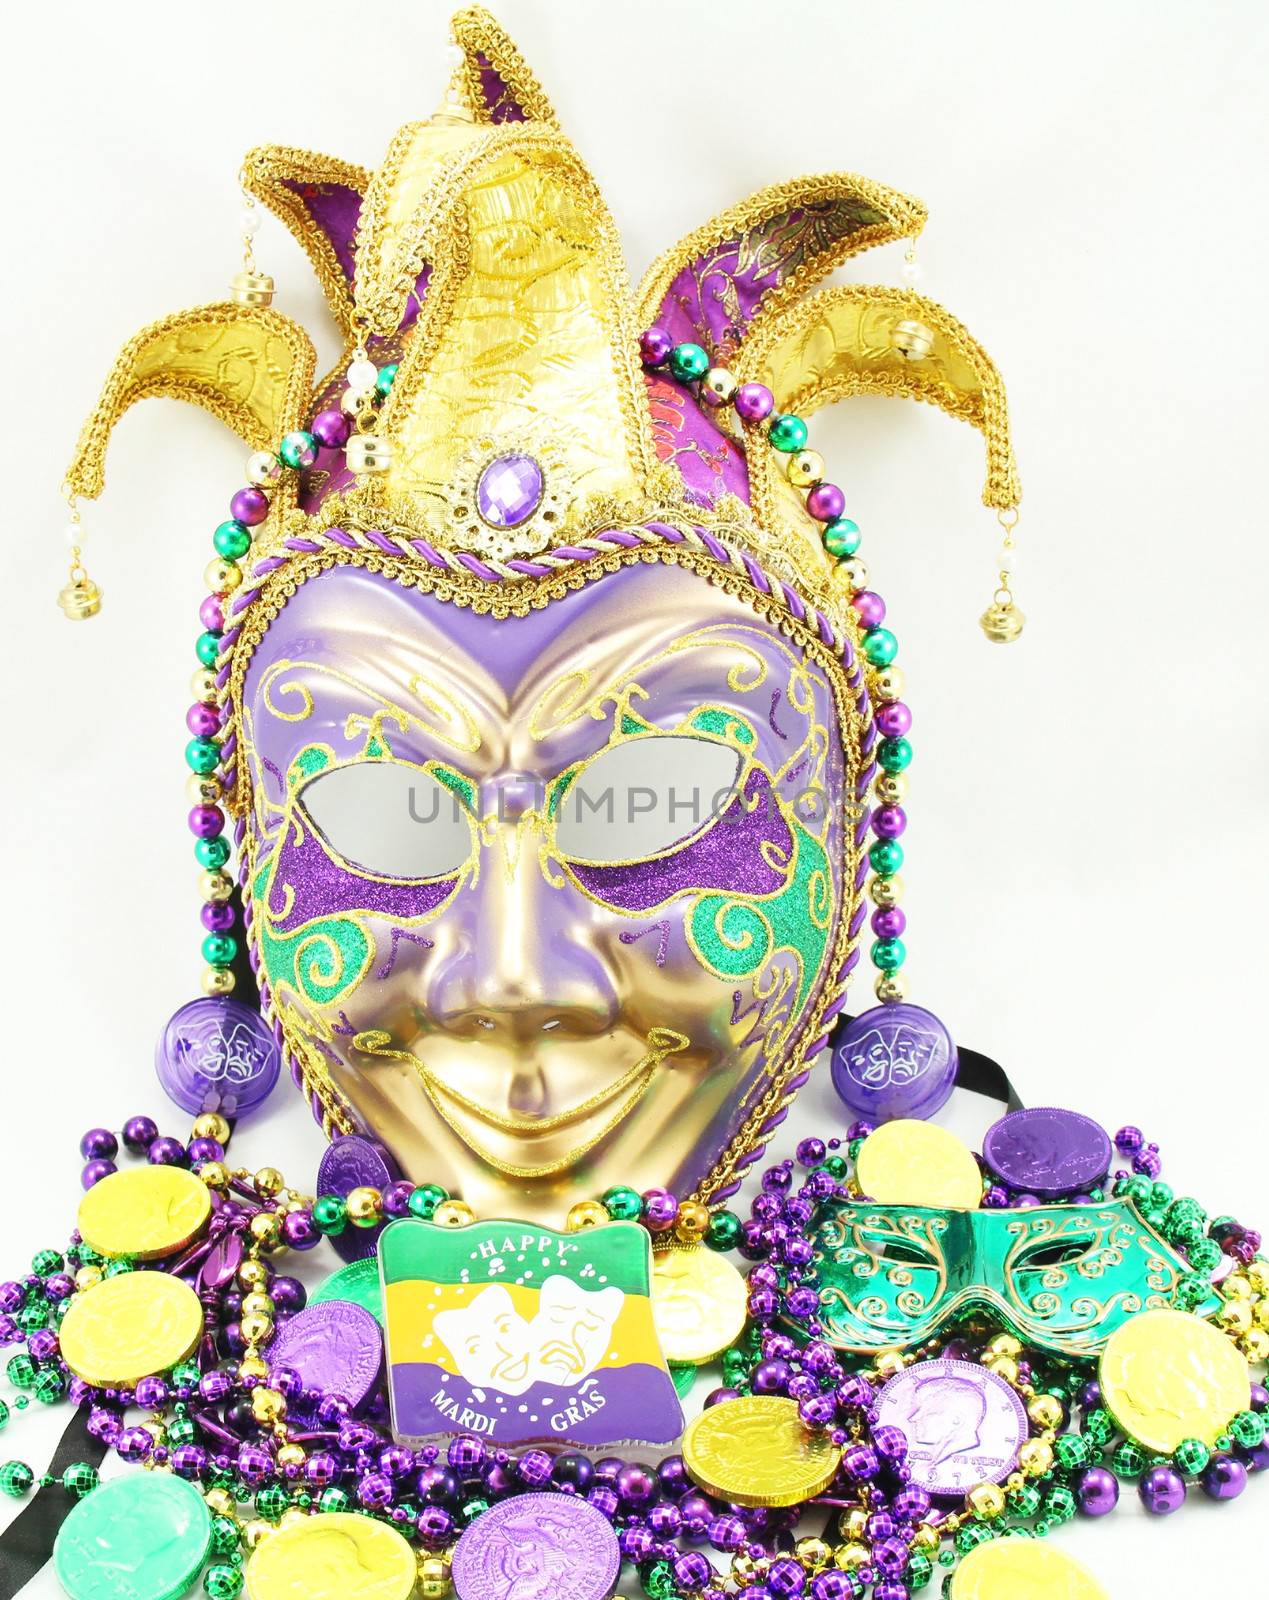 Mardi Gras Mask and Beads by bellafotosolo